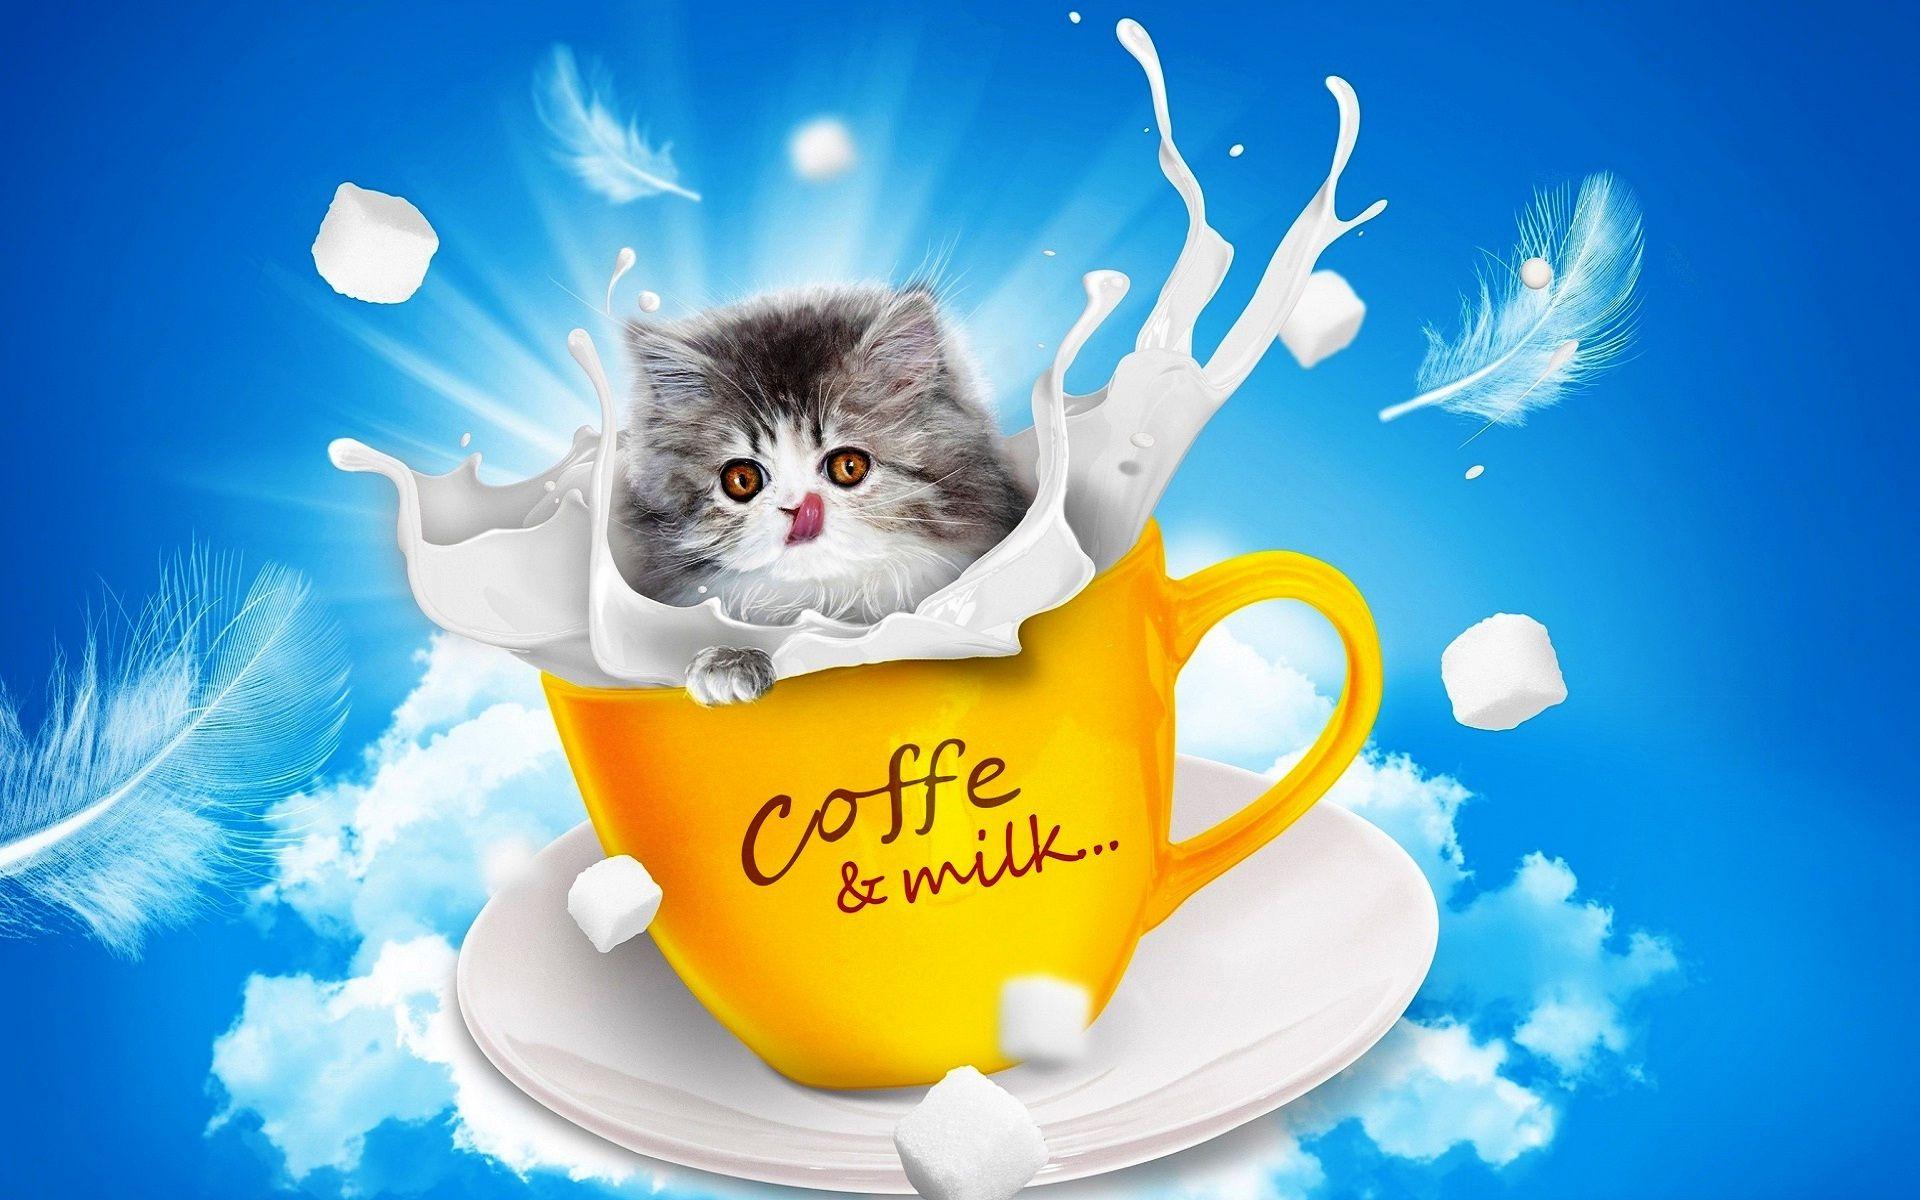 Good morning coffee funny wallpapers download